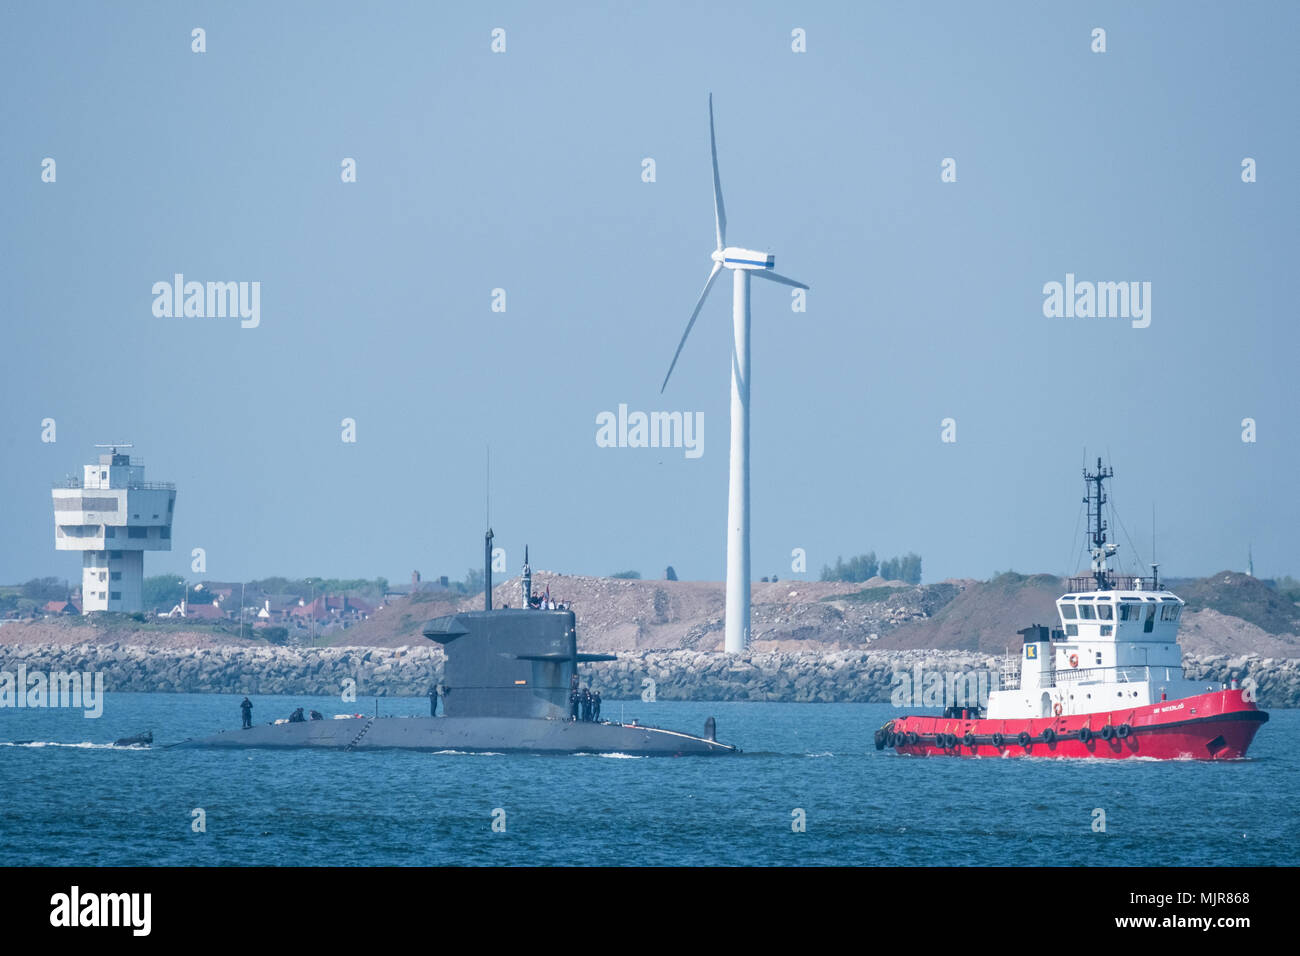 Dutch Submarine HNLMS Zeeleeuw arrived into Liverpool docks on Sunday, May 6, 2018 following a Joint Warrior exercise, a NATO exercise held in Scotland. Credit: Christopher Middleton/Alamy Live News Stock Photo